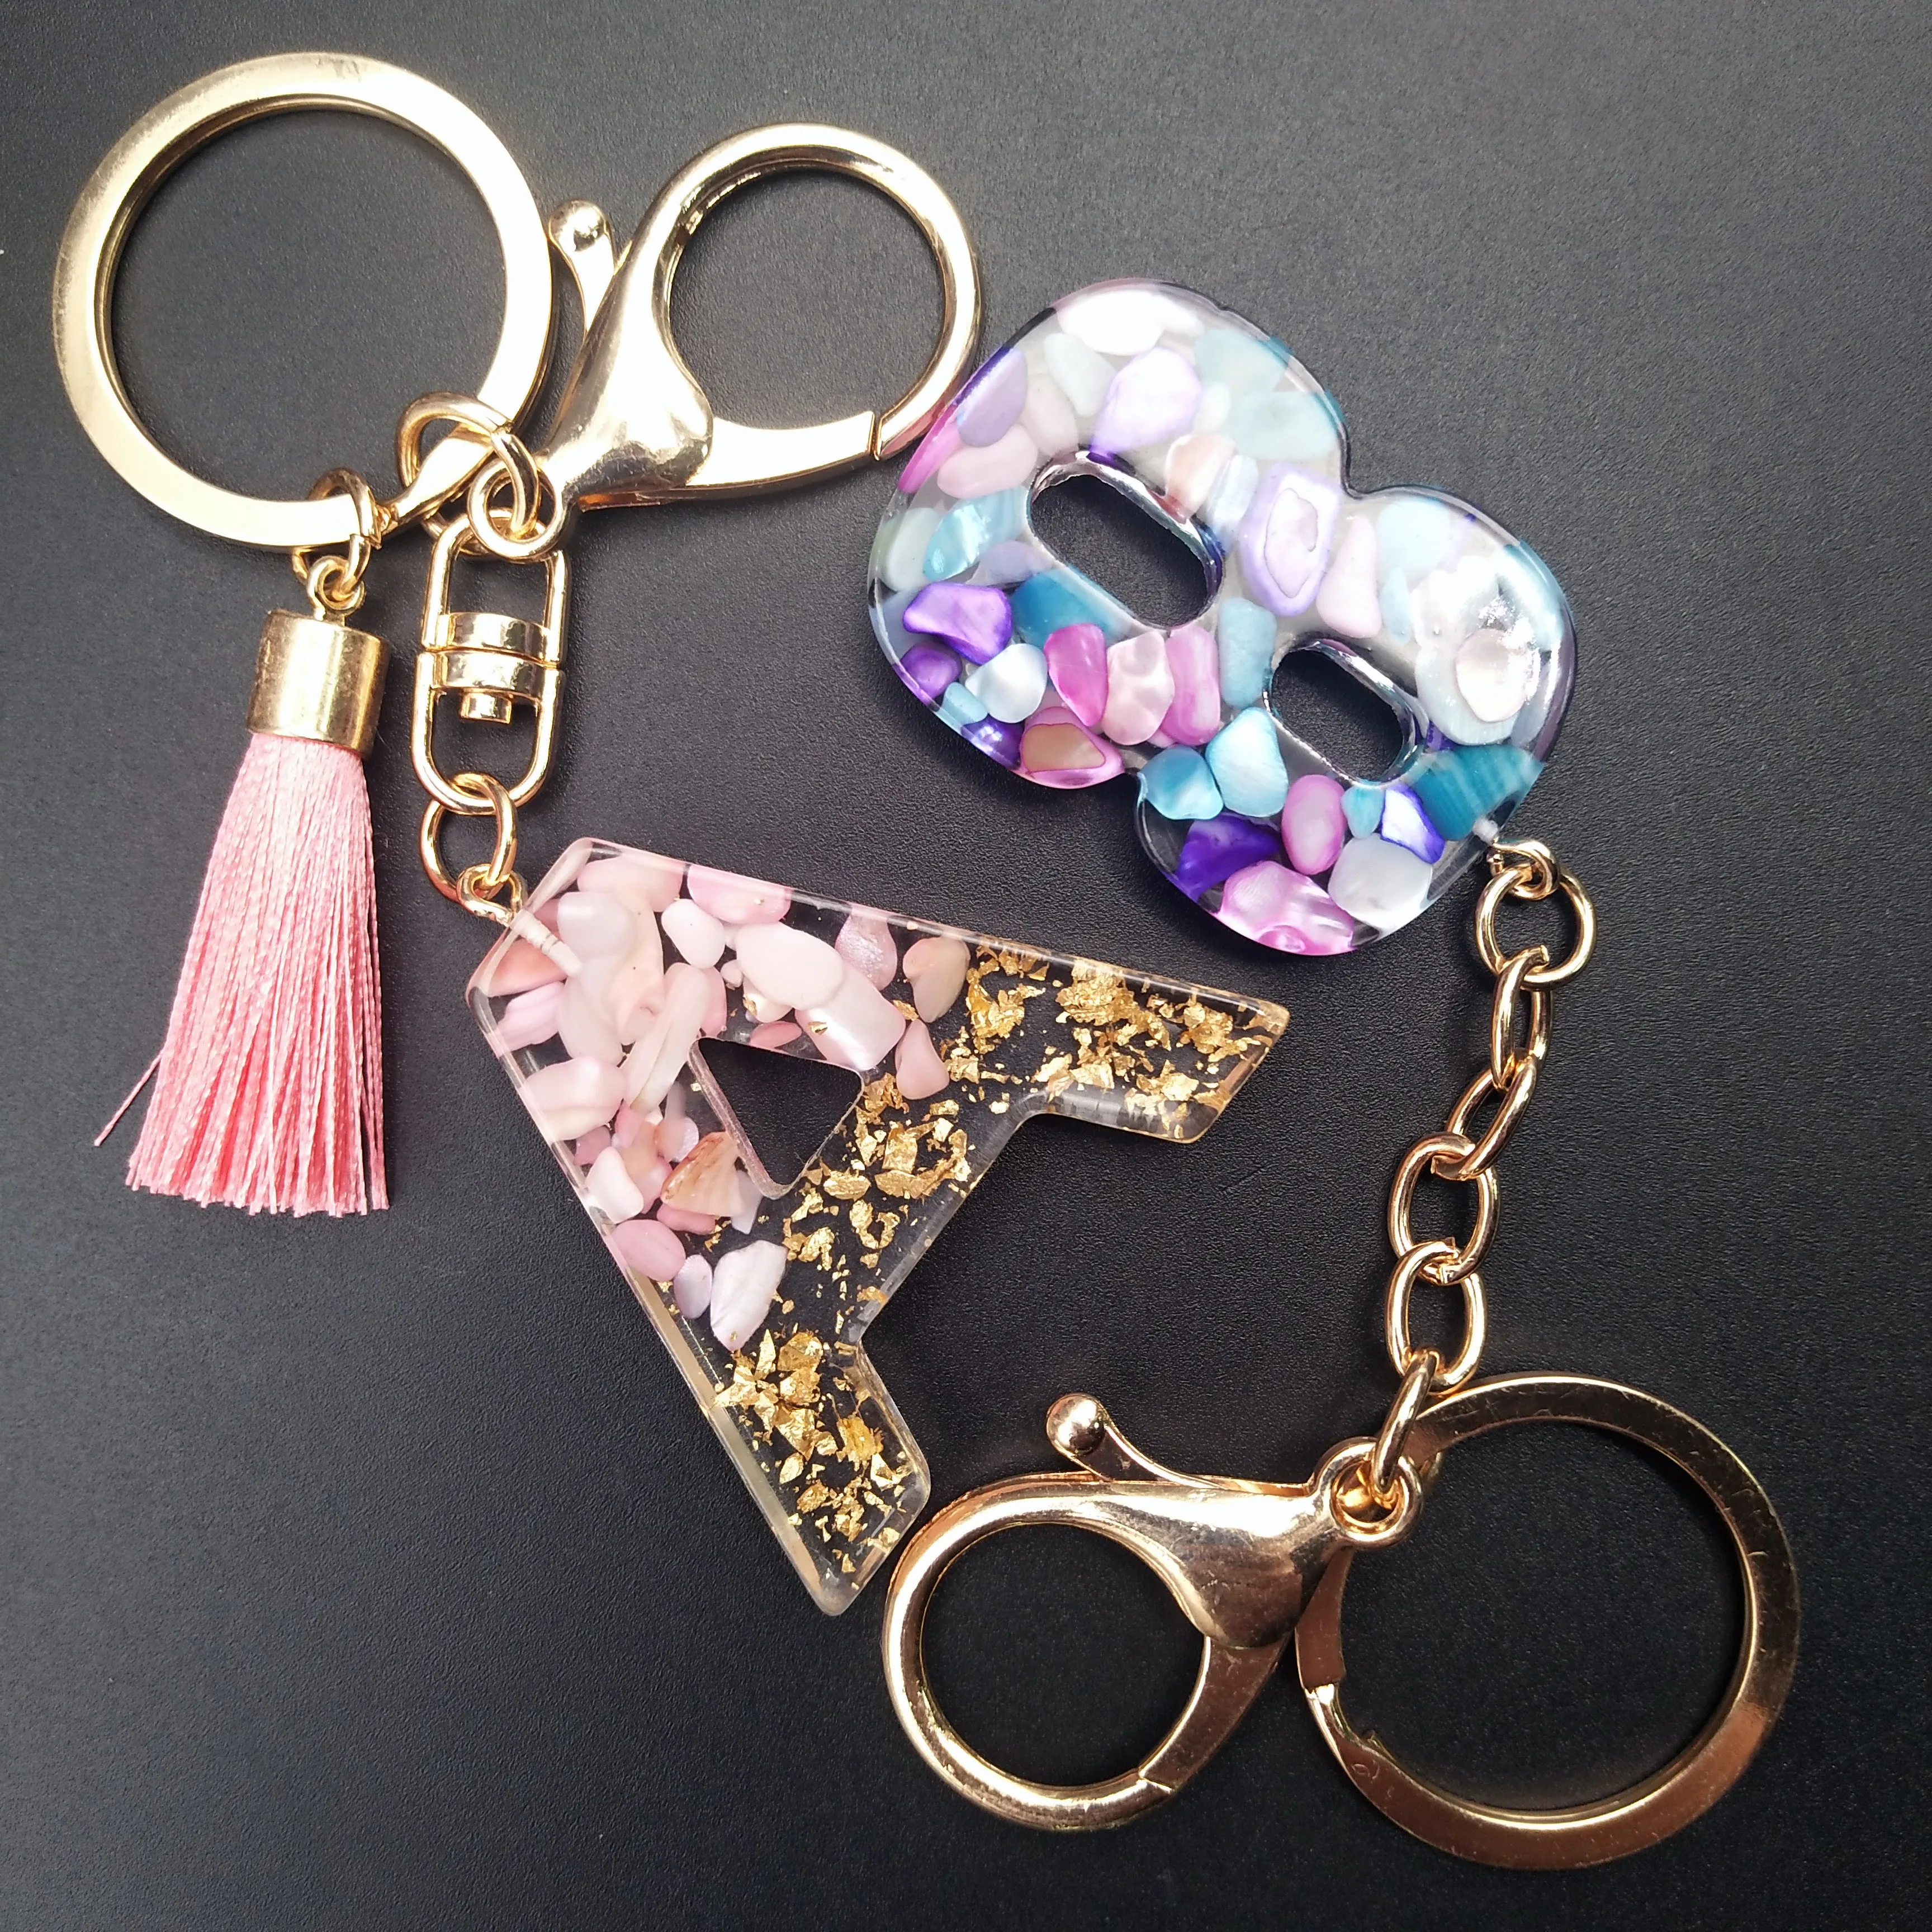 Glossy Personalized Resin Letter Keychain and Lipgloss Bundle